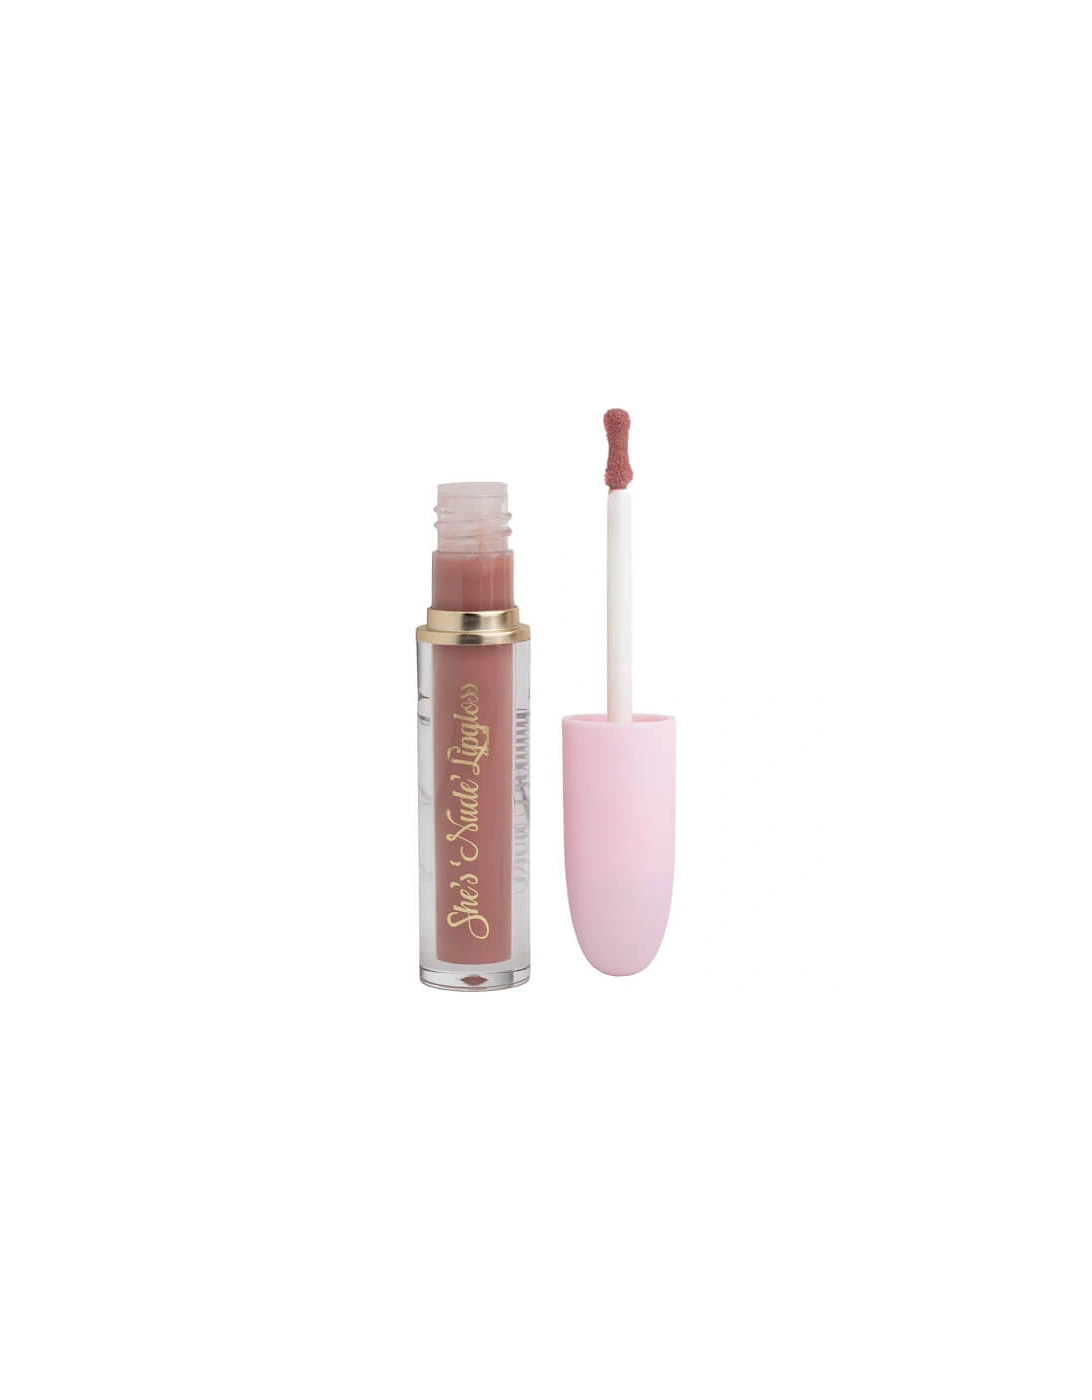 She's Nude Gloss - Get Lippy, 2 of 1